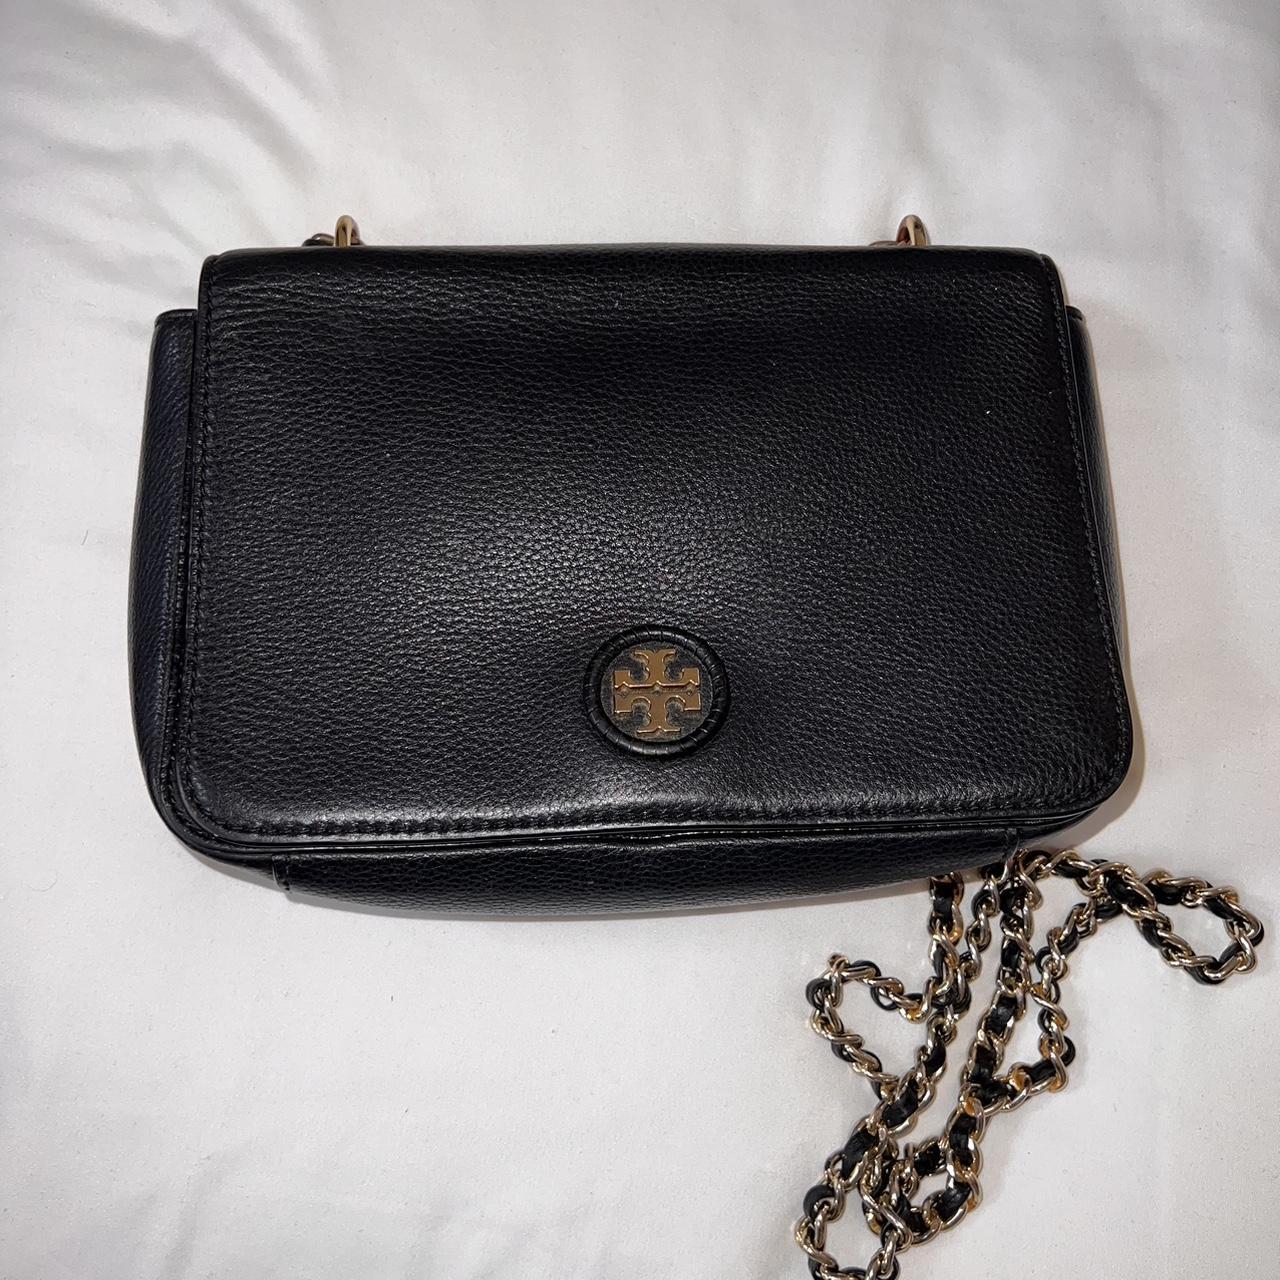 Tory Burch Kira Quilted Leather Cross Body Bag in Black | Lyst